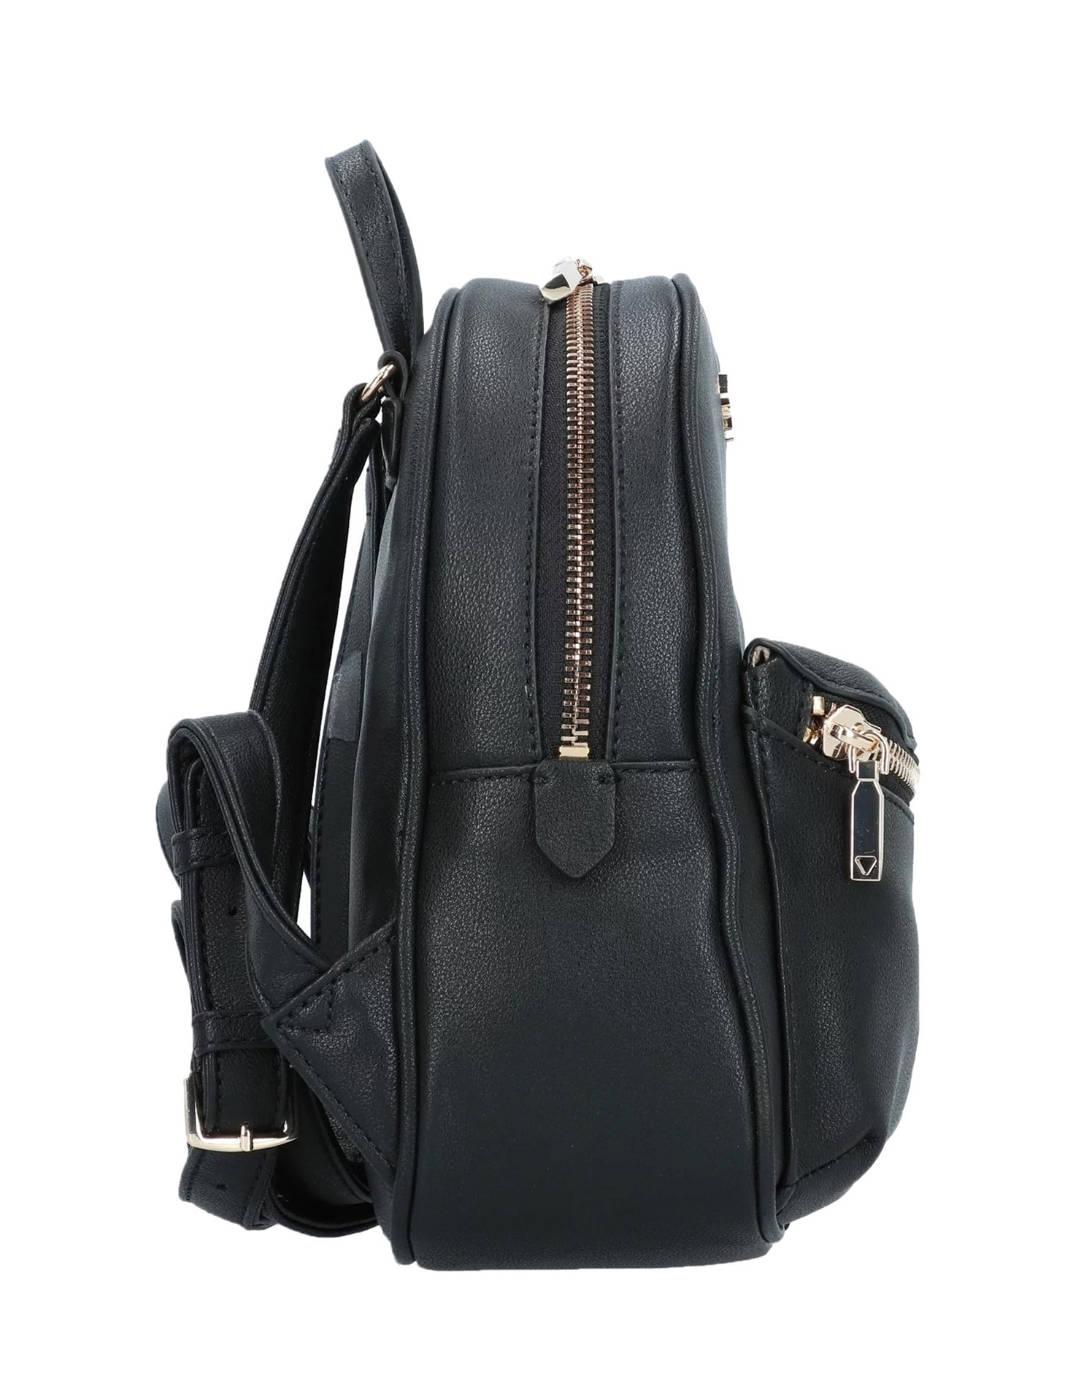 Mochila Guess House Party negra pequeña para mujer